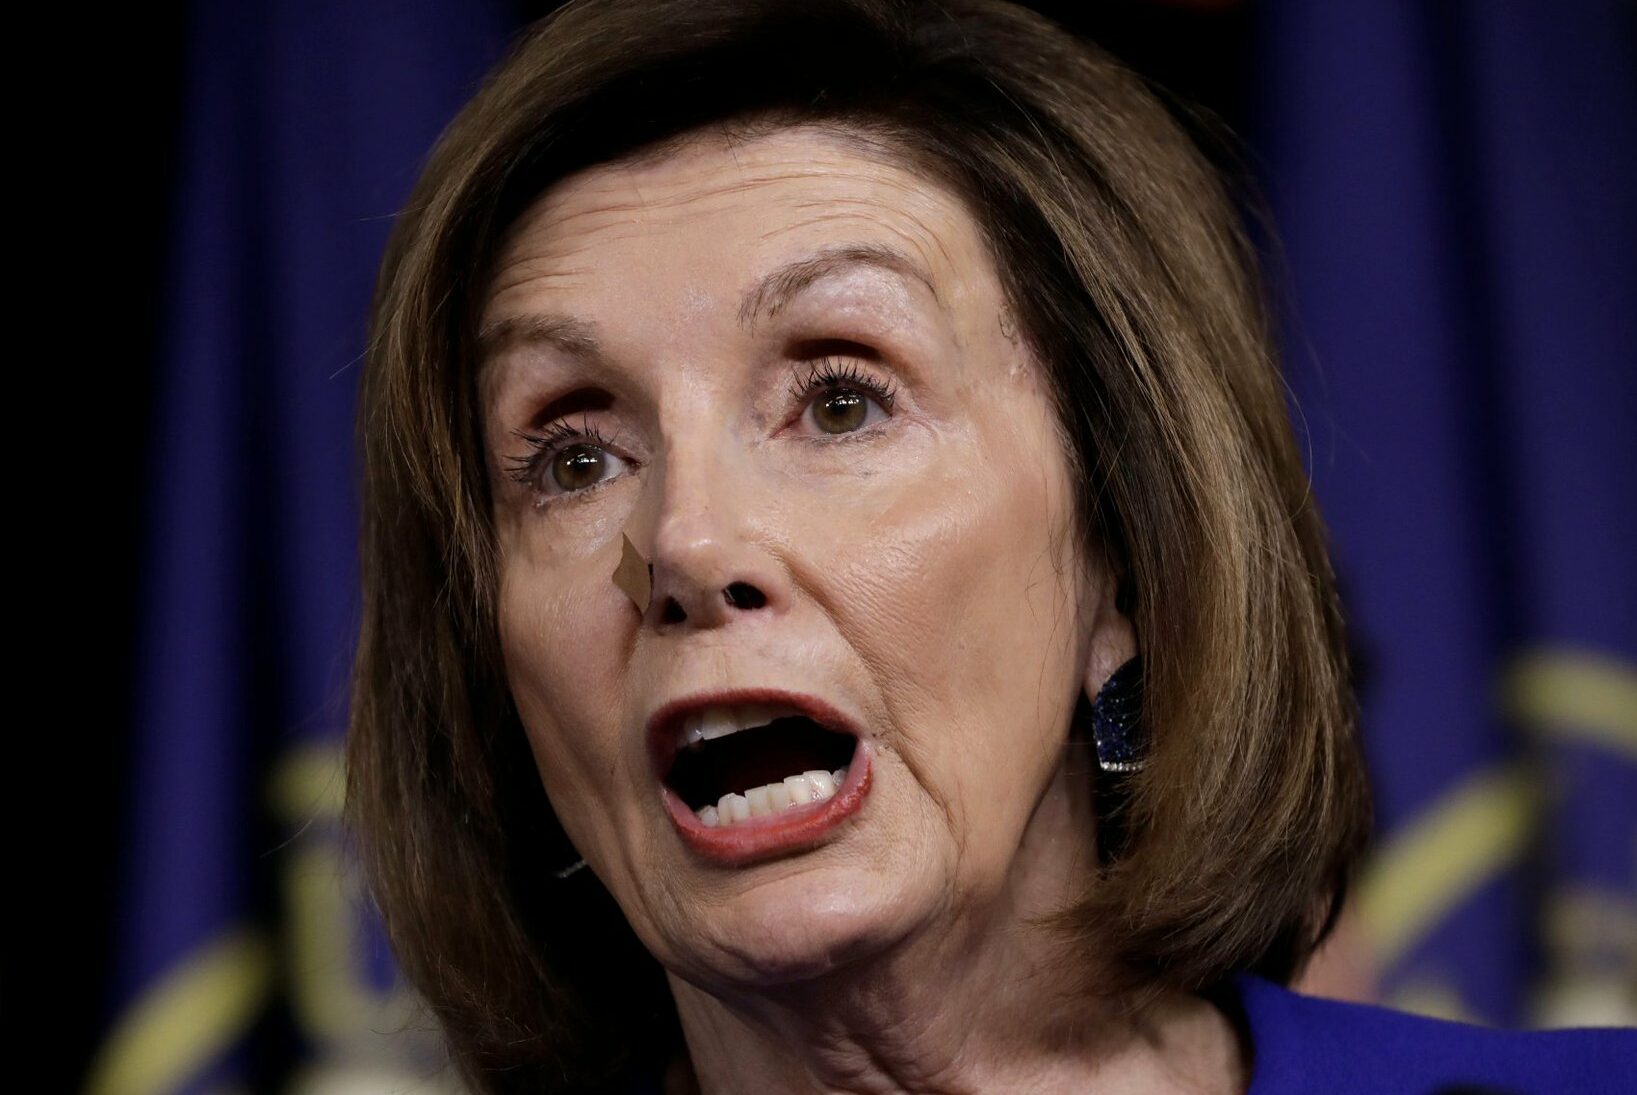 House Speaker Nancy Pelosi’s nose has been bandaged for over a we...